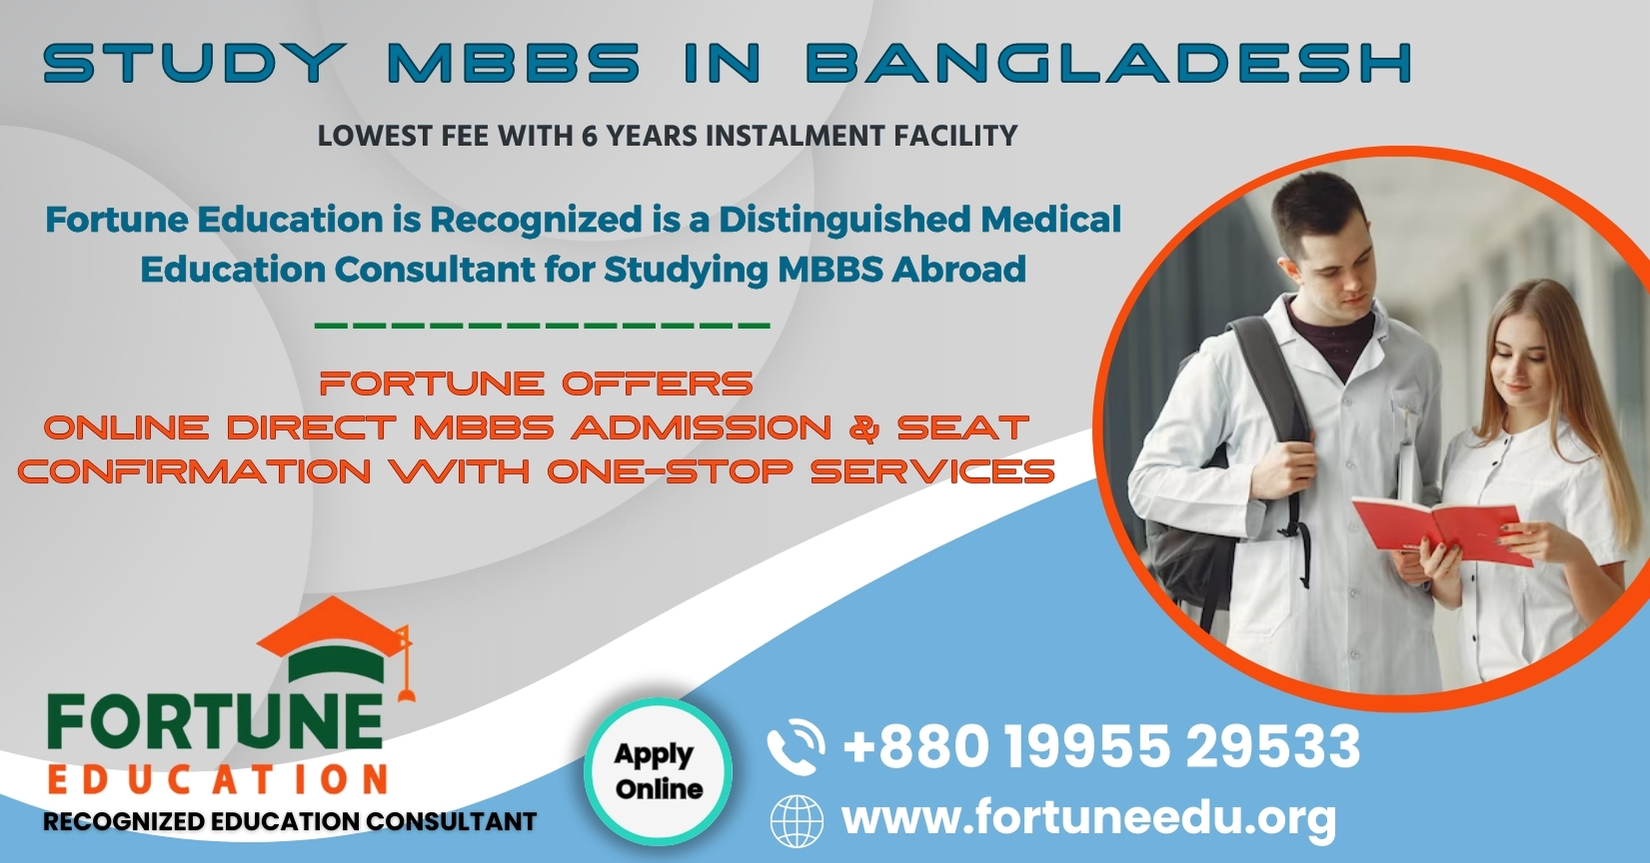 Career Opportunities After Completing MBBS in Bangladesh for International Graduates